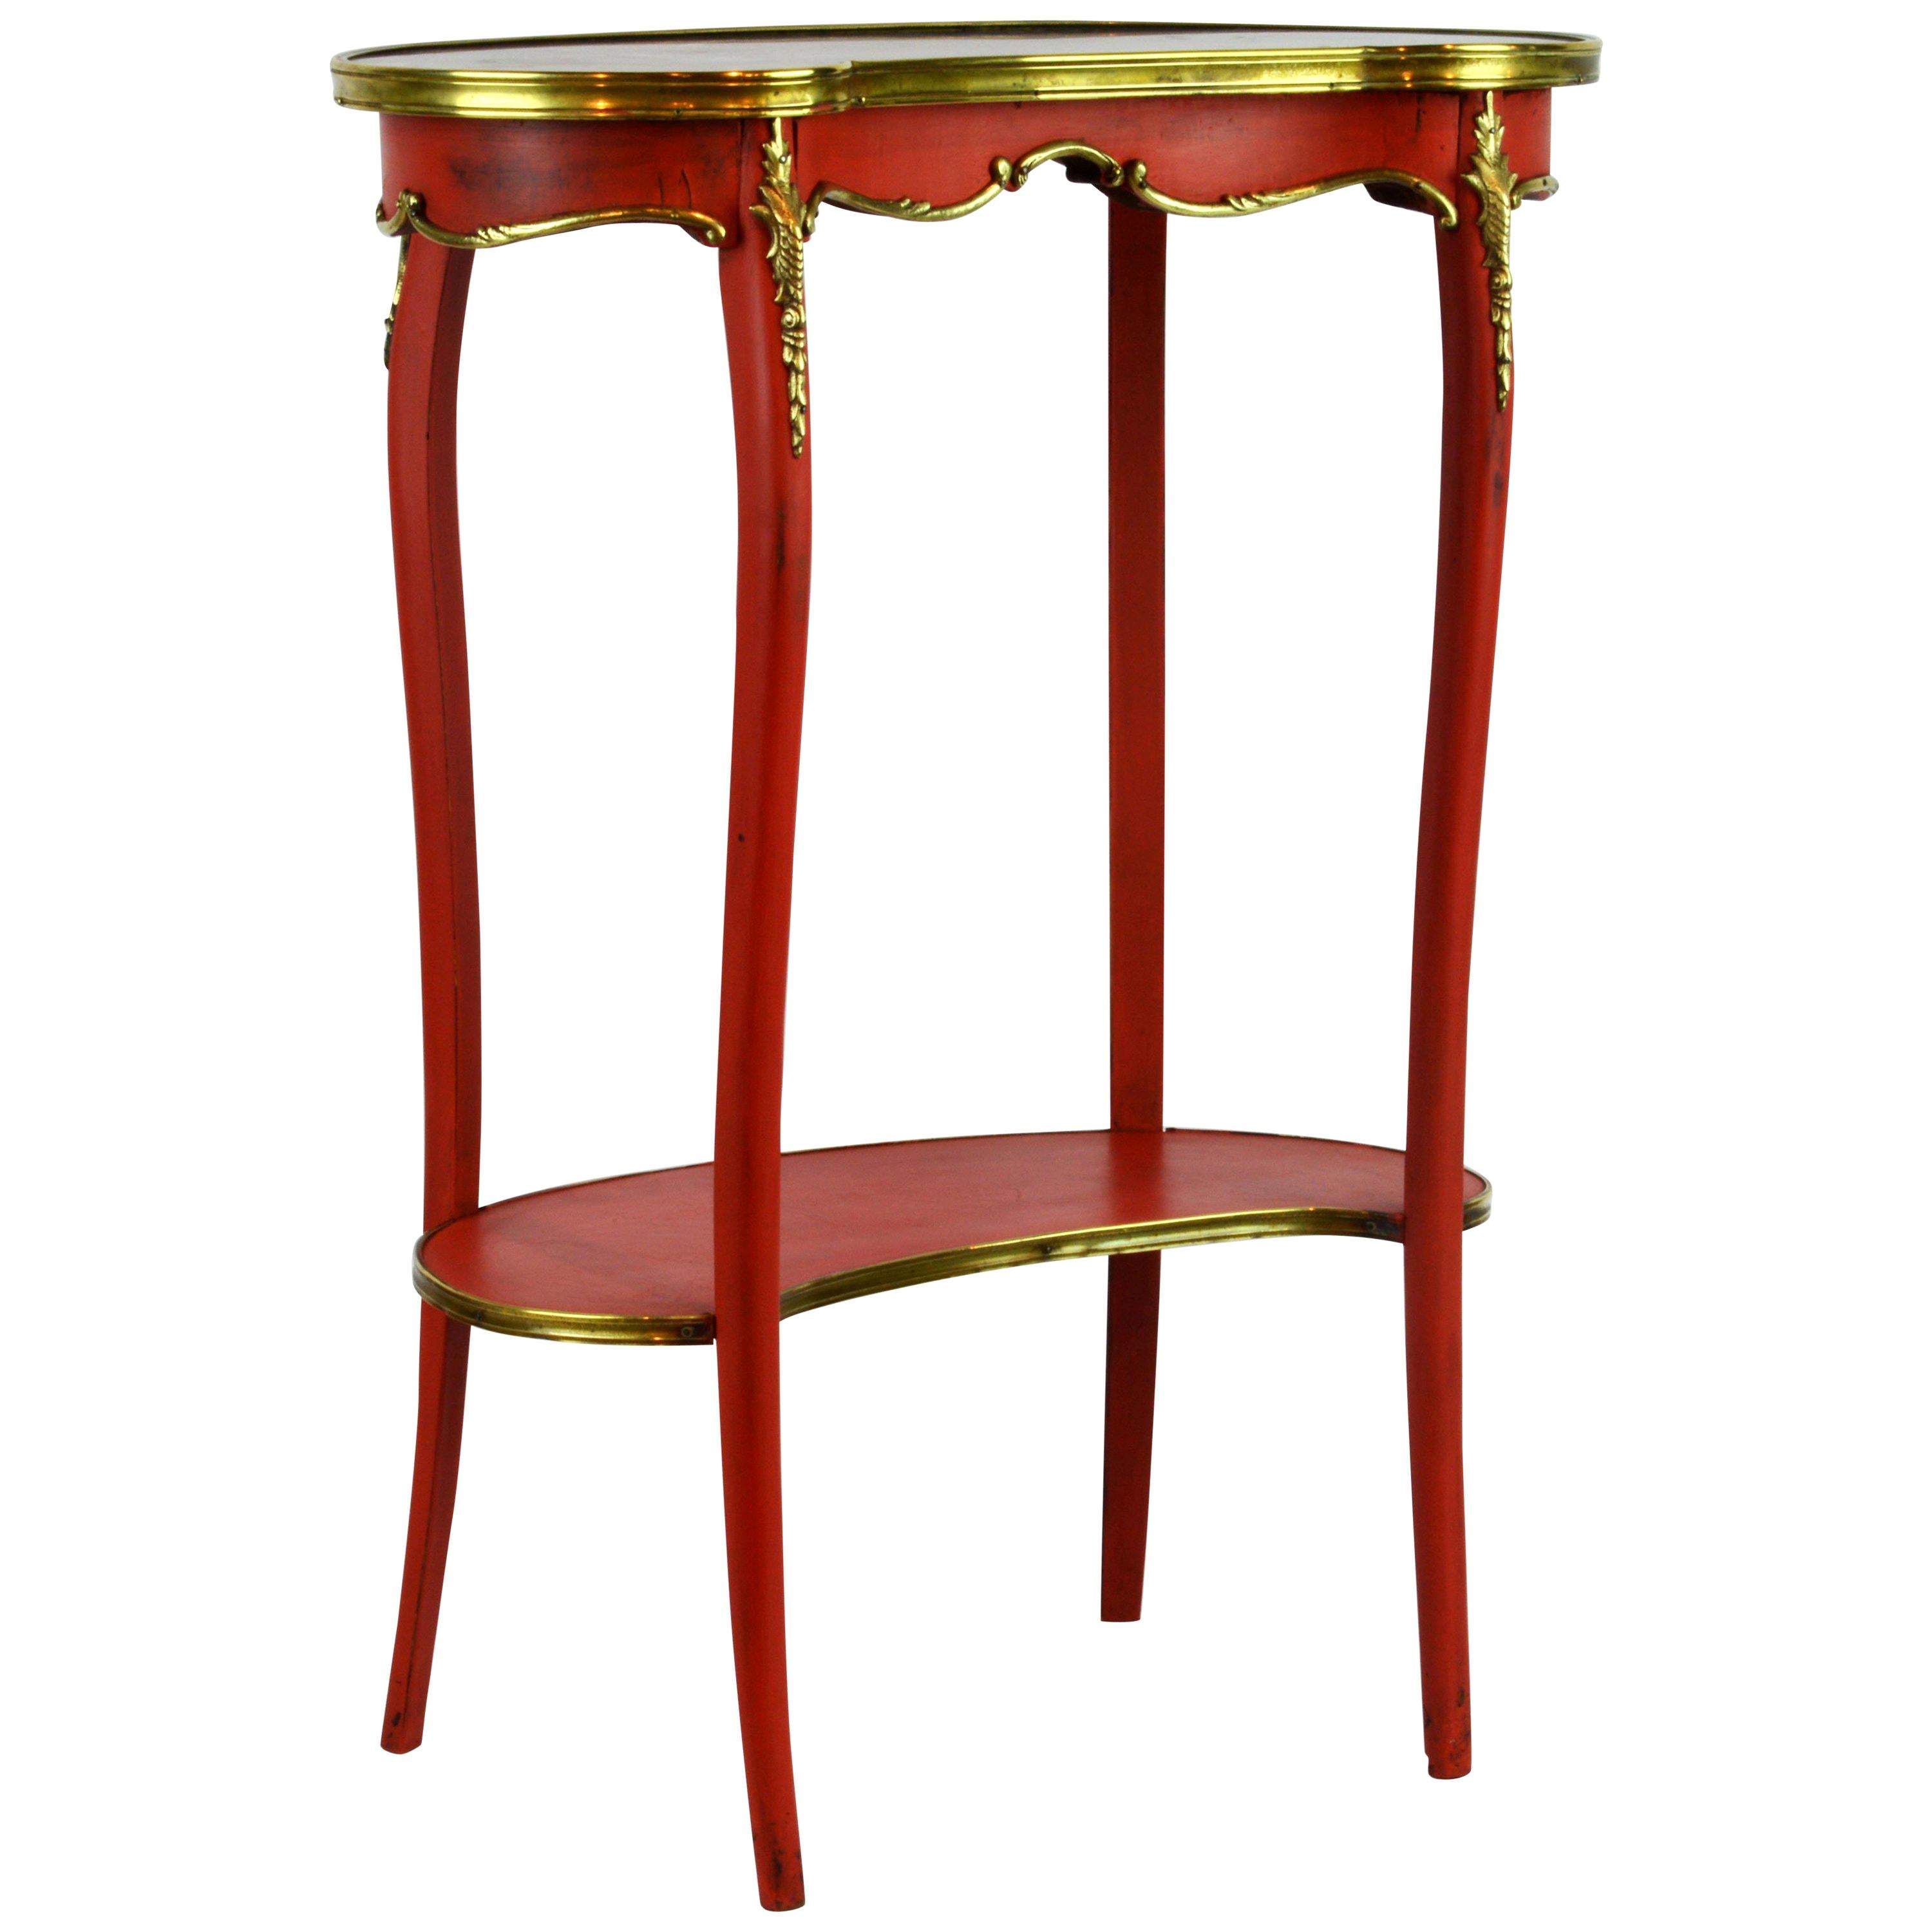 Charming French Provincial Painted and Bronze-Mounted Kidney Shape Accent Table